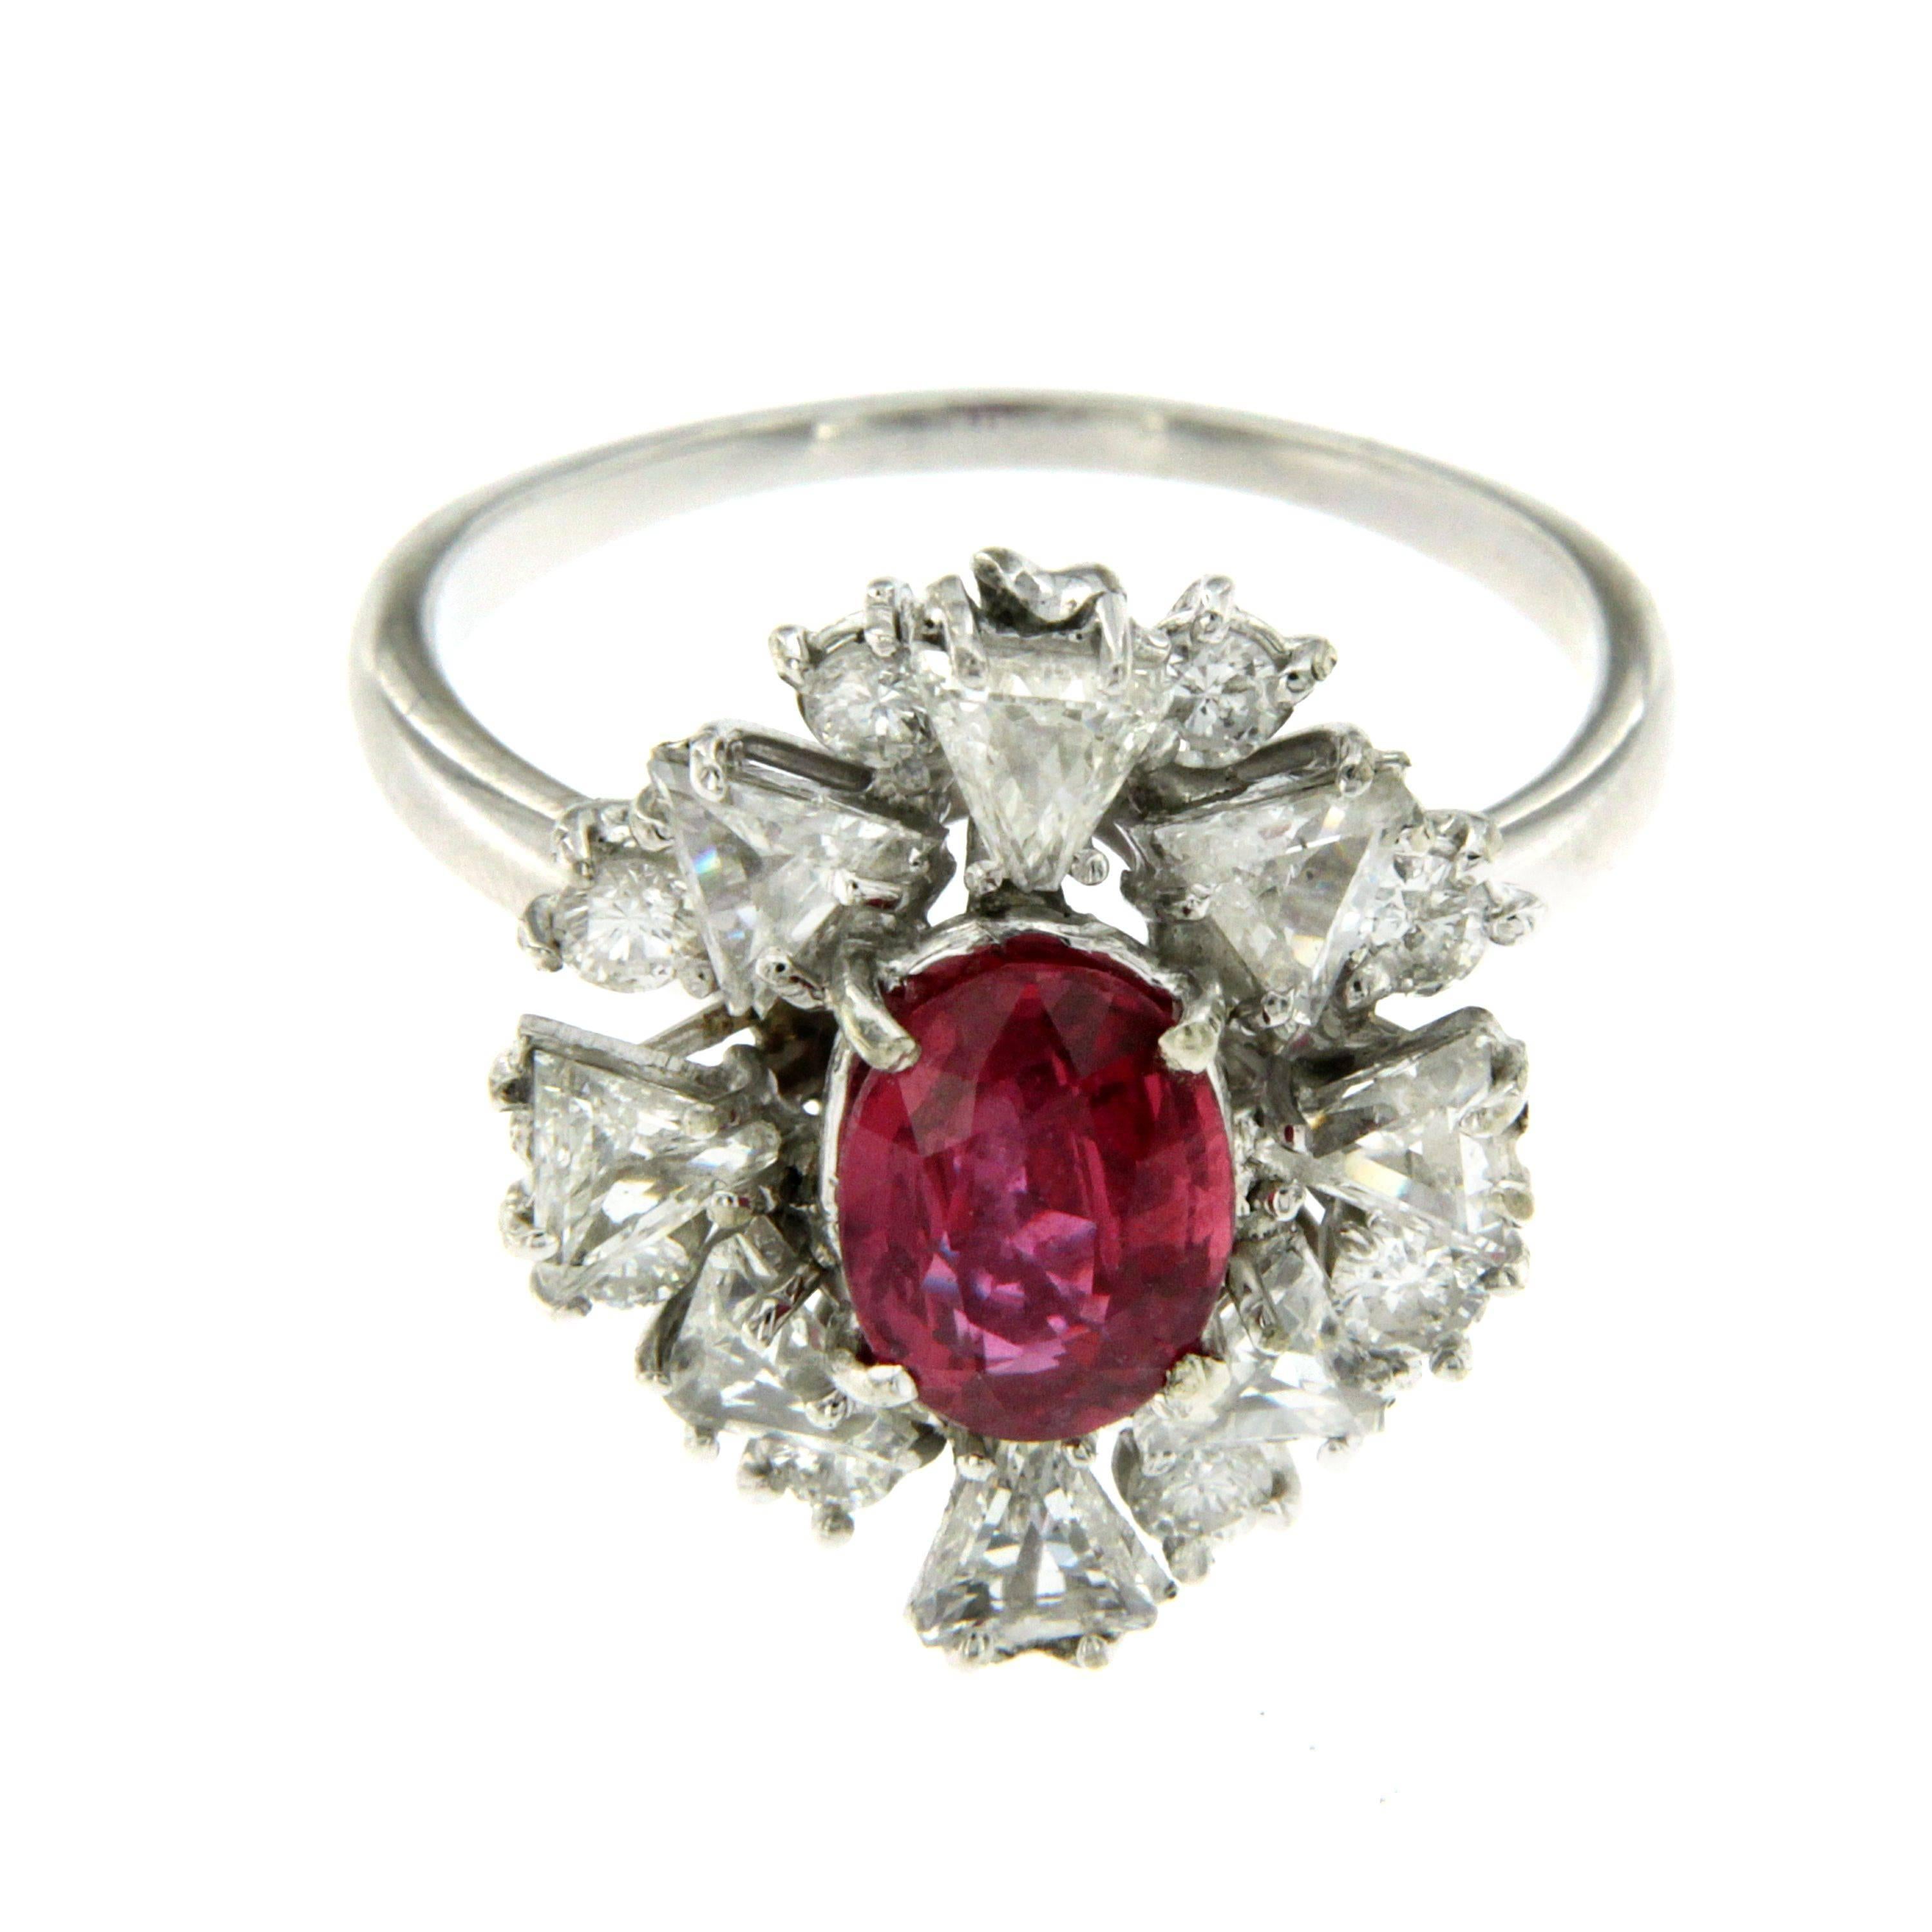 A fine and impressive 1.55 carat natural curundum Ruby 2.00 carat diamond and 18 karat white gold cluster ring; 
The ruby comes with an American Gemological Laboratories (AGL) certificate n° CS1076143
The ring features an oval mixed cut natural